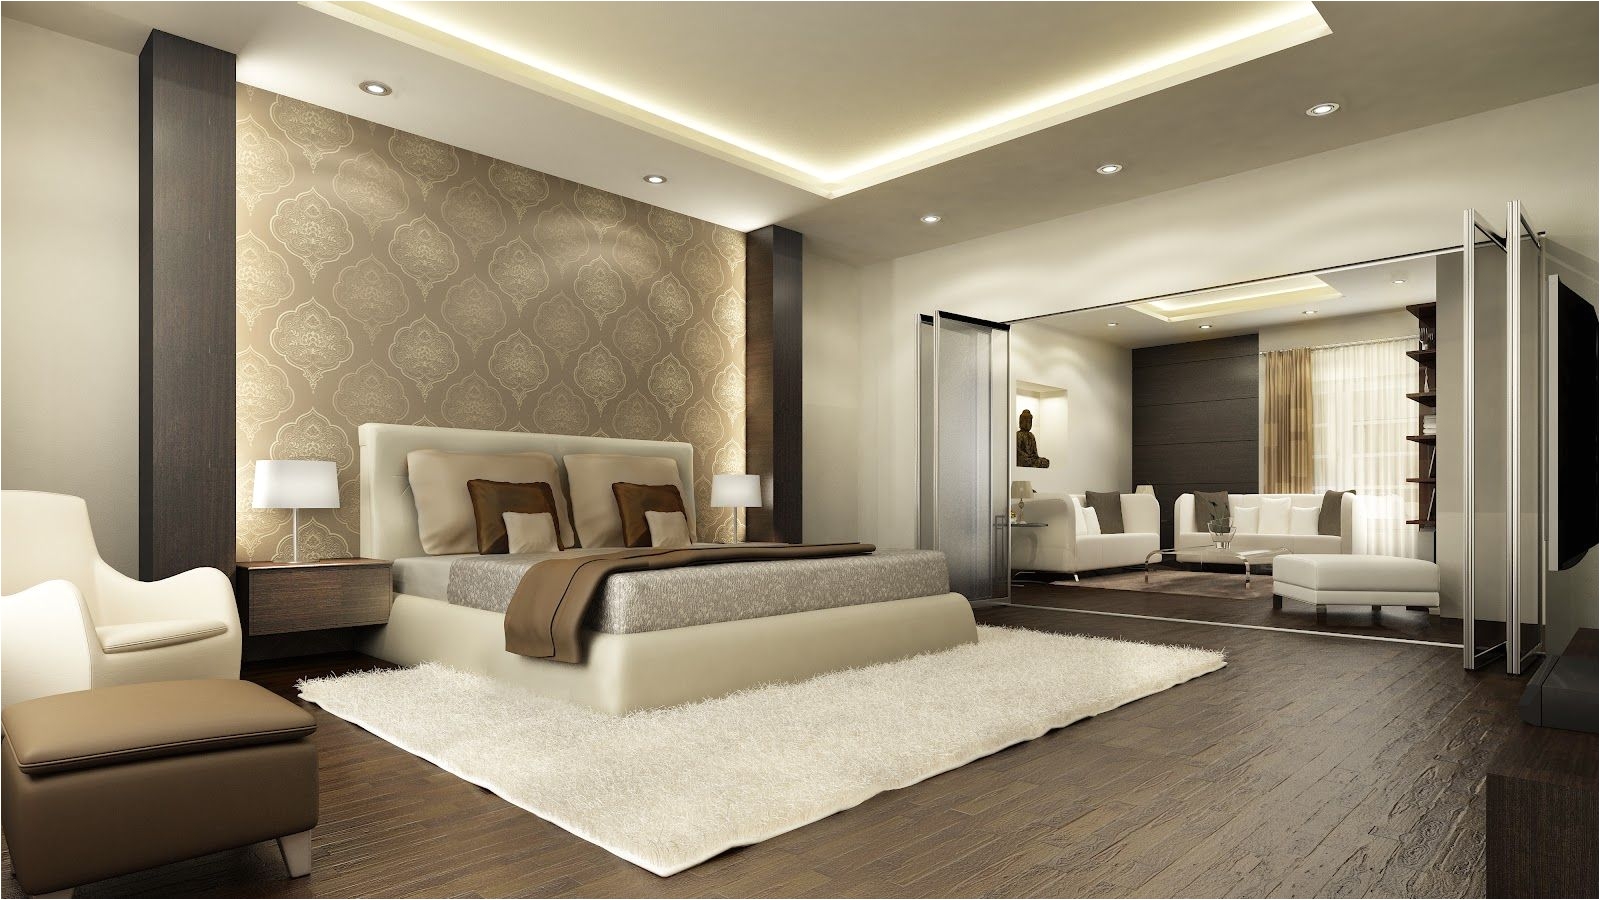 I would love to have this in my future dream house Master Bedrooms Bedroom Suites